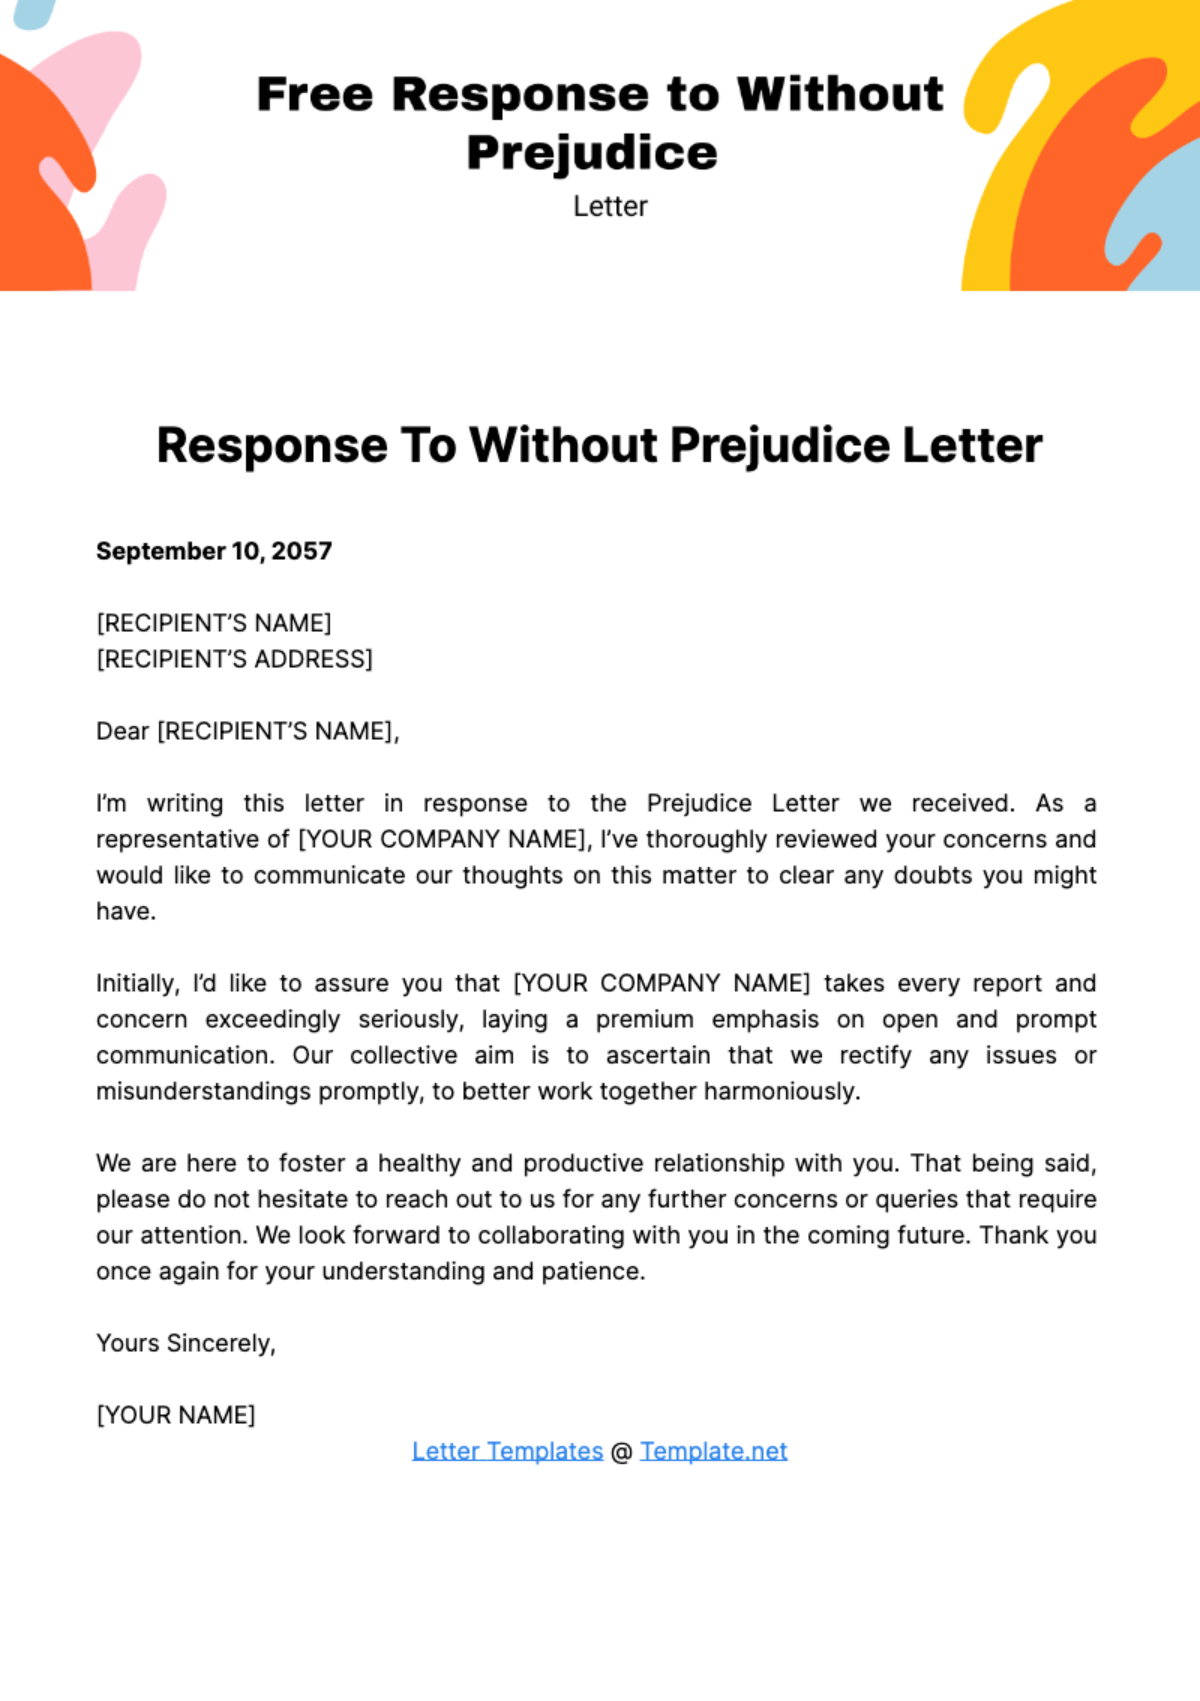 Free Response to Without Prejudice Letter Template